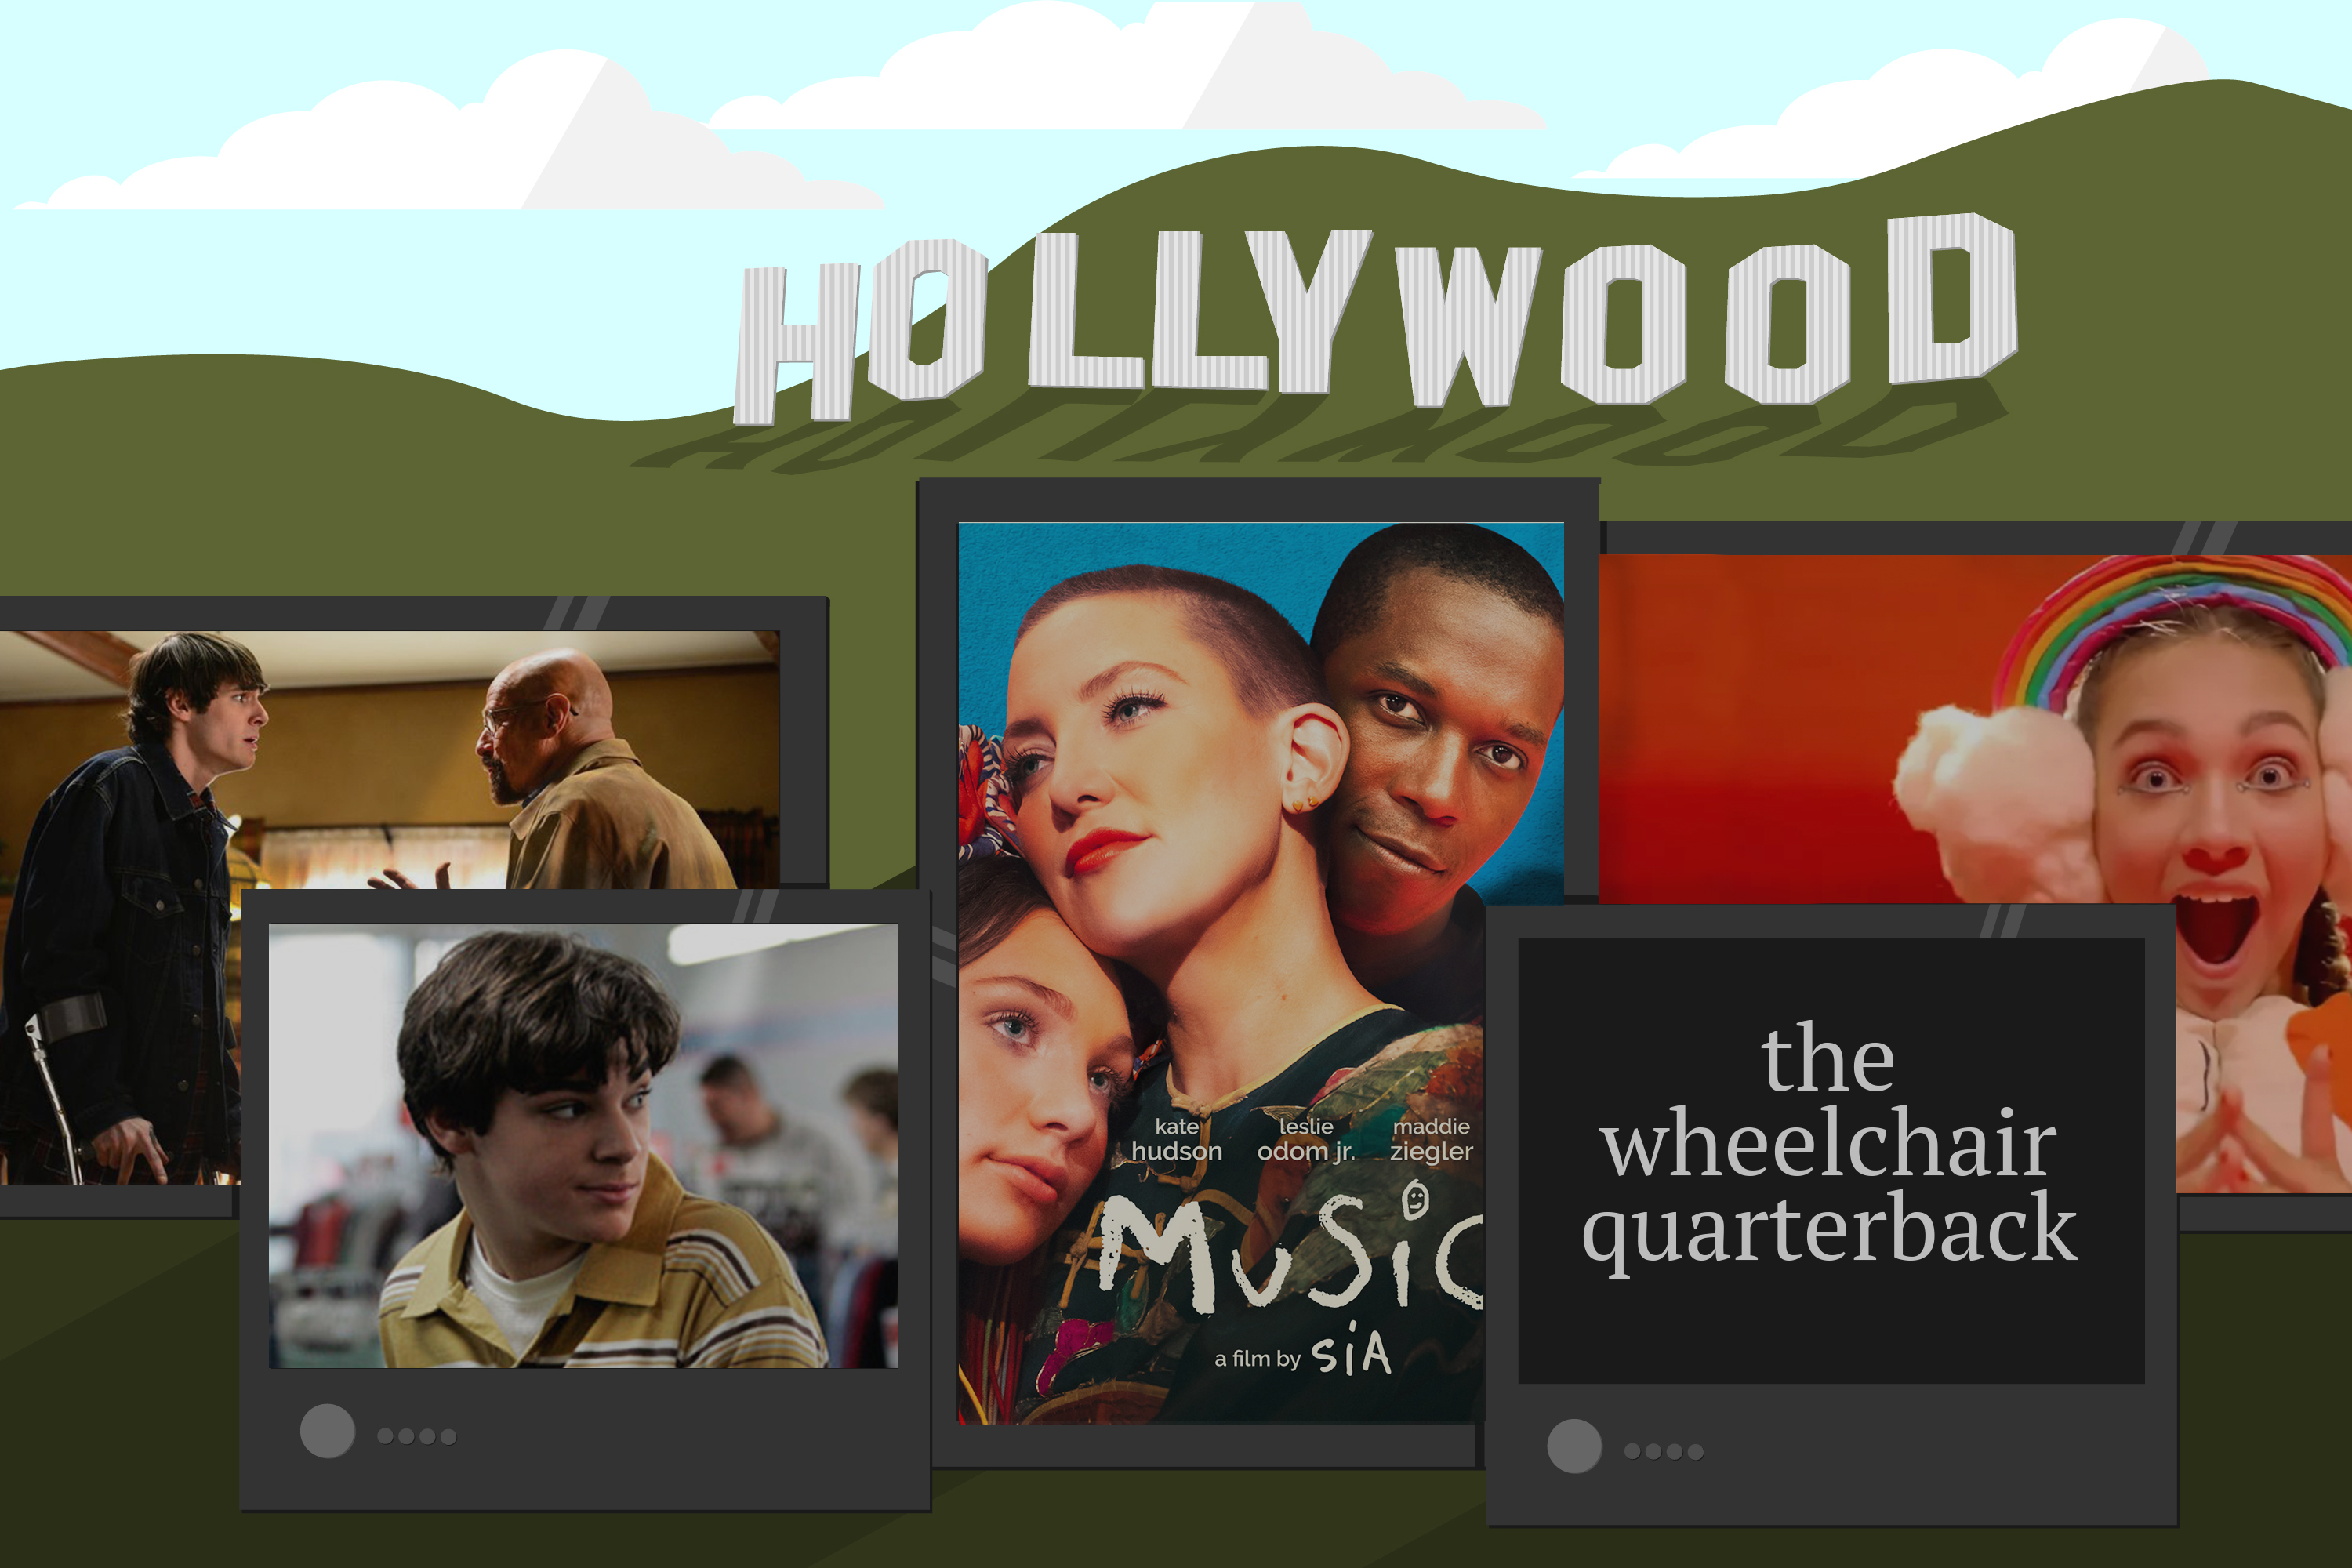 Movie and TV scenes and posters are illustrated in front of an illustration of the Hollywood sign.